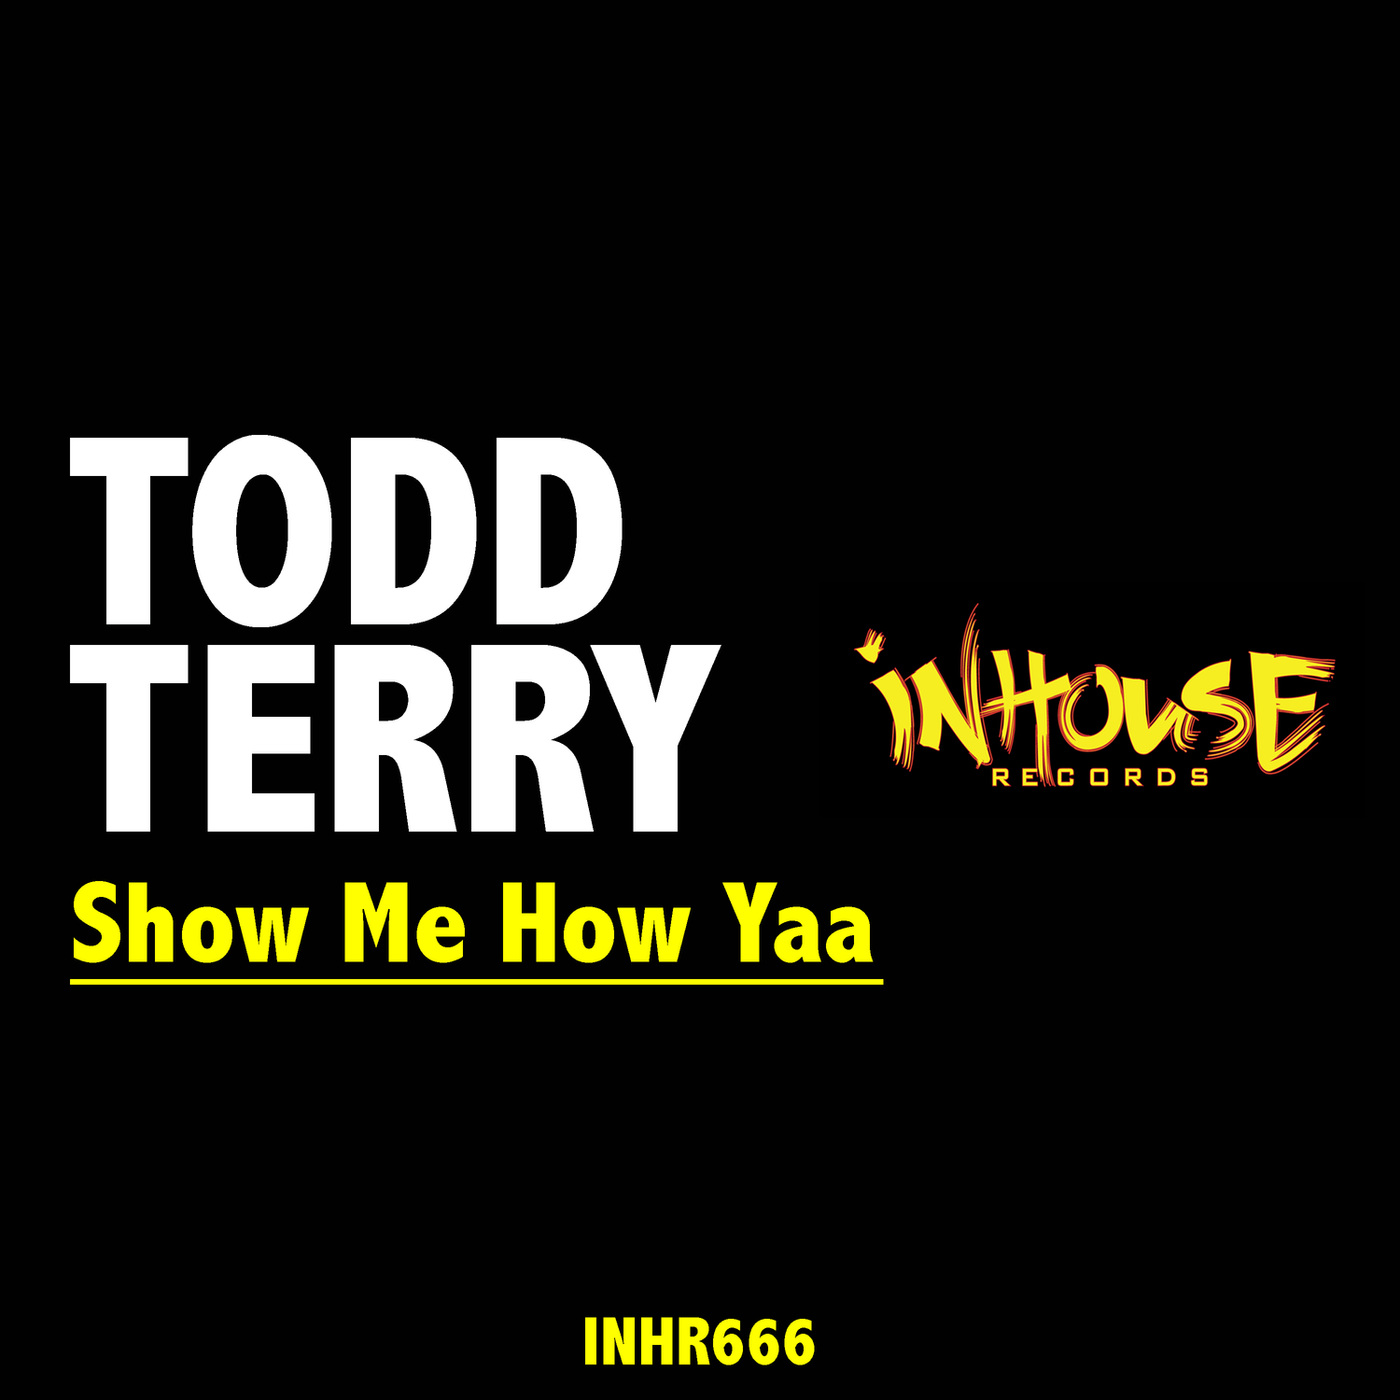 Todd Terry - Show Me How Yaa / InHouse Records